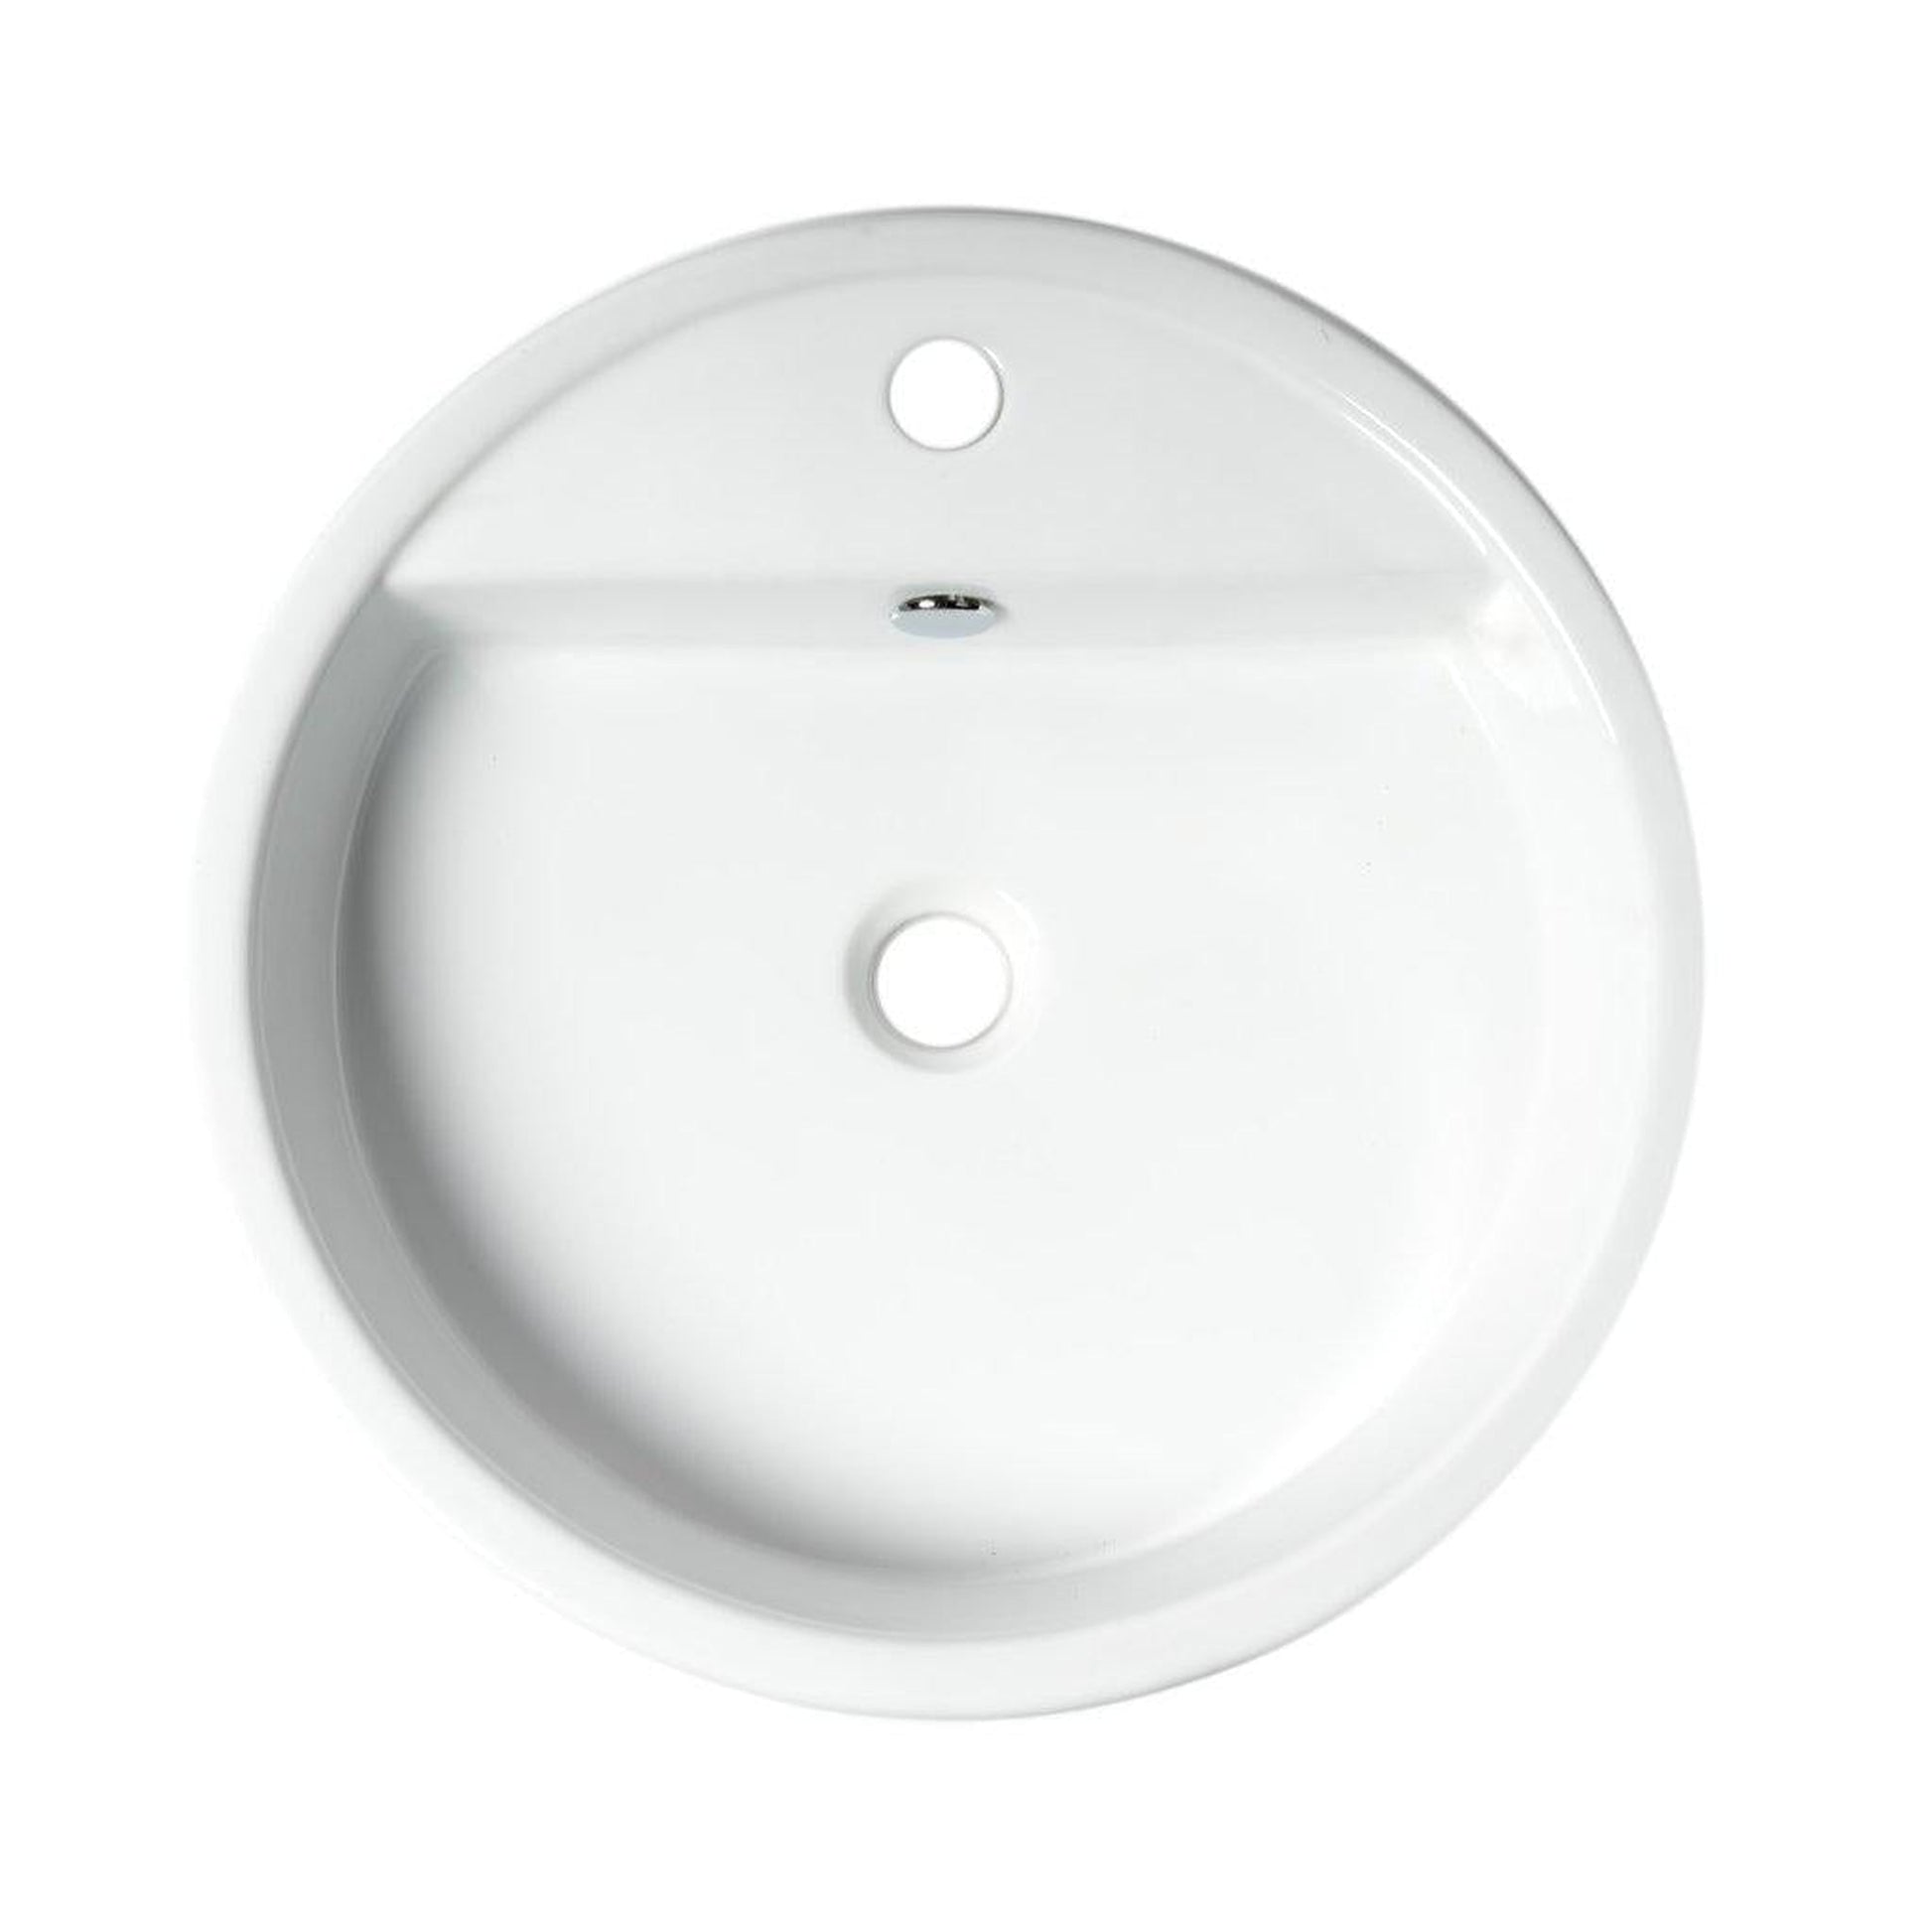 ALFI Brand ABC702 19" White Glossy Semi Recessed Round Ceramic Bathroom Sink With Single Faucet Hole and Overflow